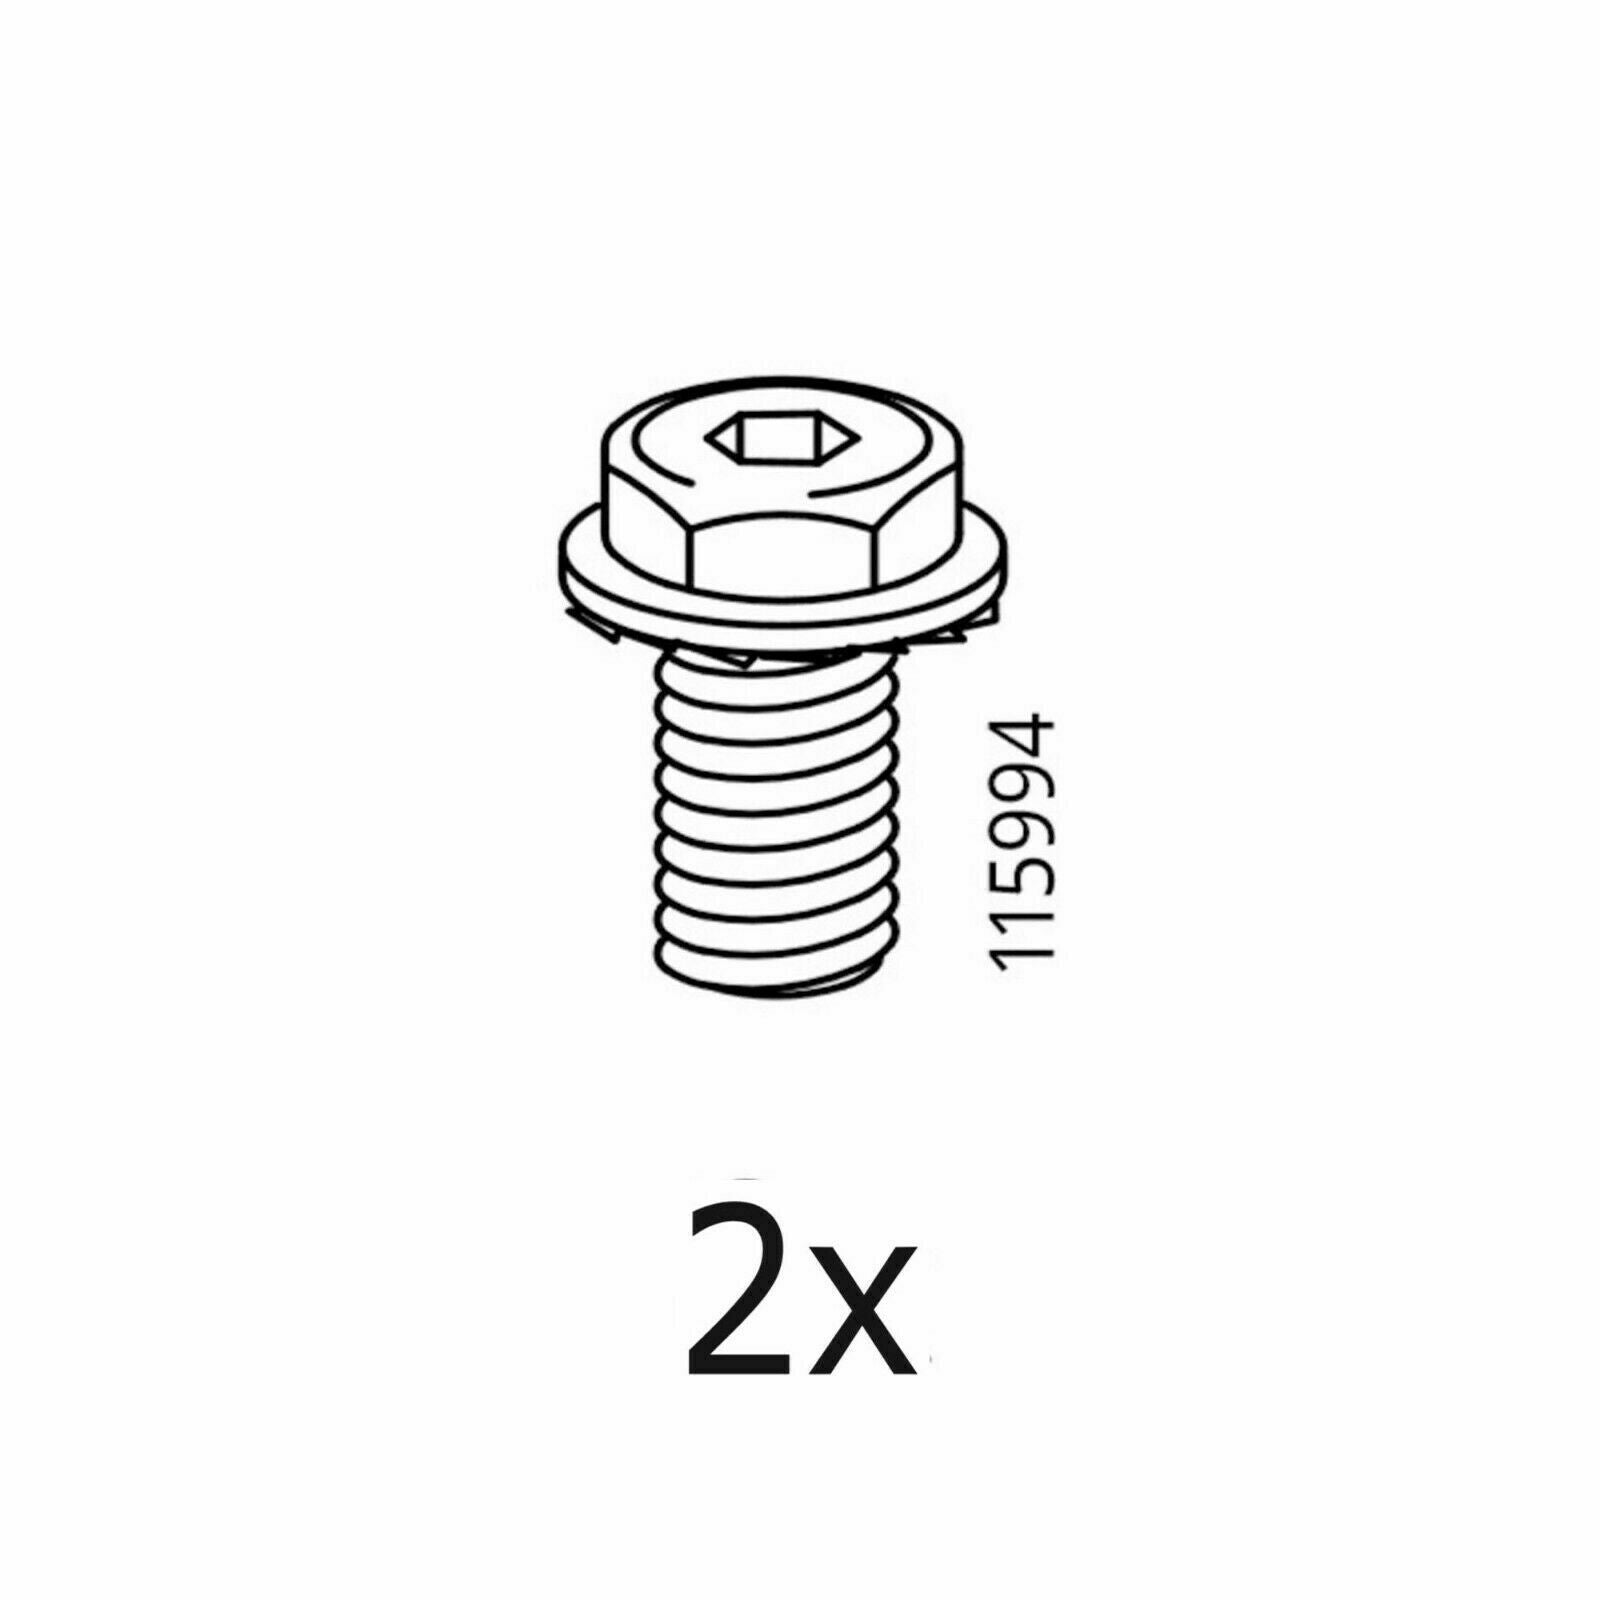 IKEA Hex Bolts Parts # 115994 (2 pack) Furniture Hardware Fittings